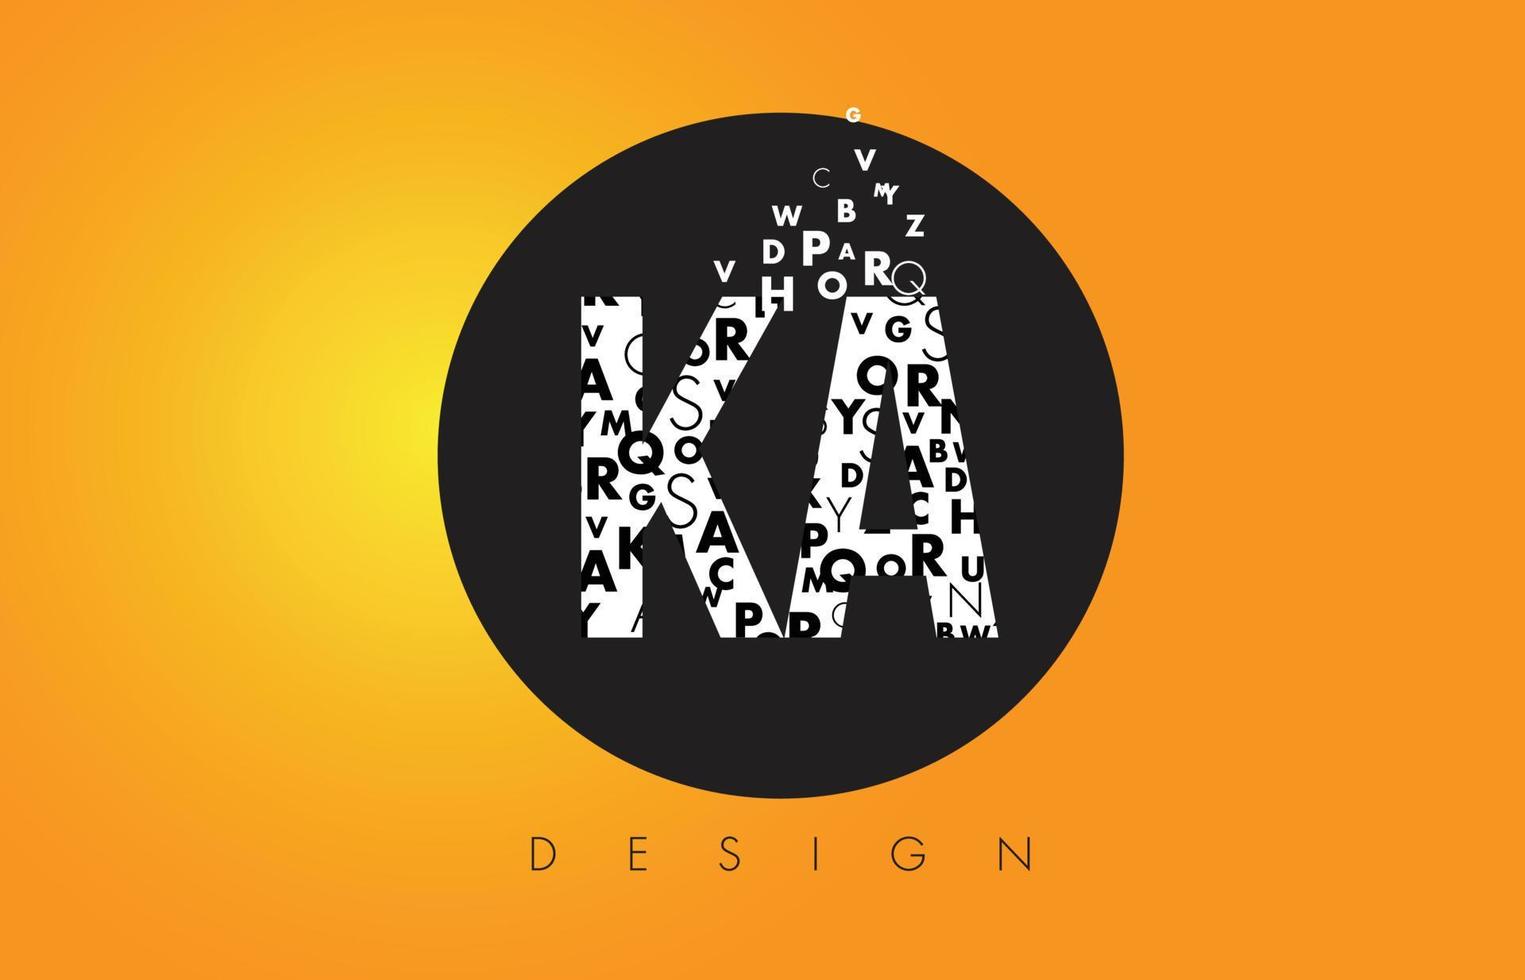 KA K A Logo Made of Small Letters with Black Circle and Yellow Background. vector